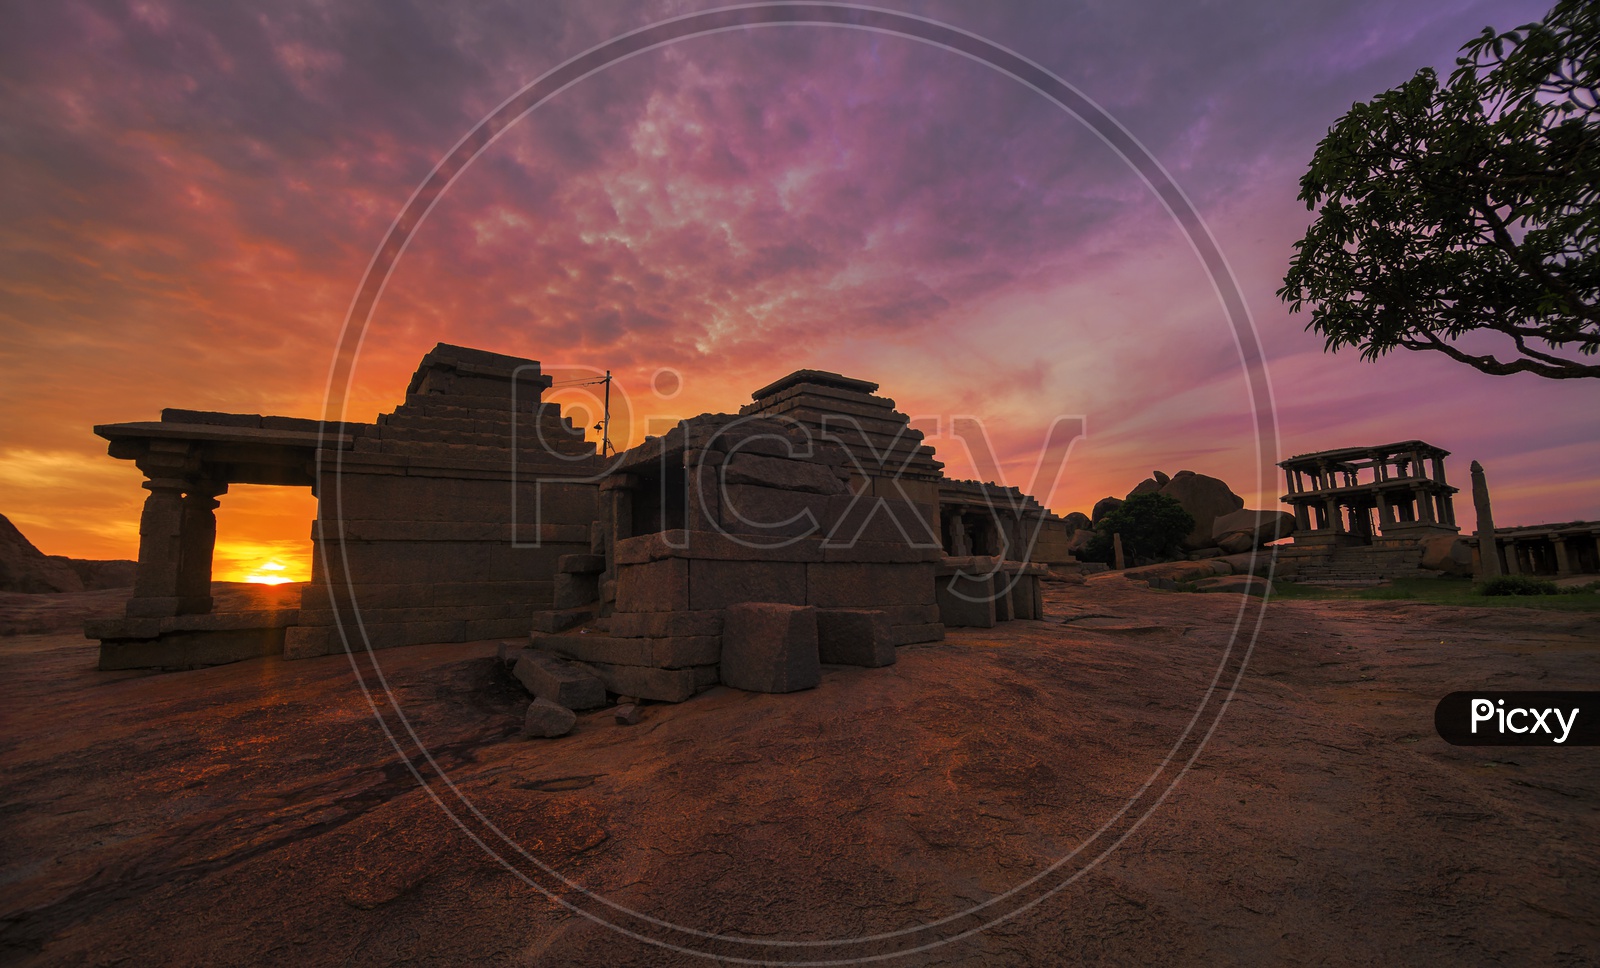 Magical sunset and Ancient ruins of Hampi